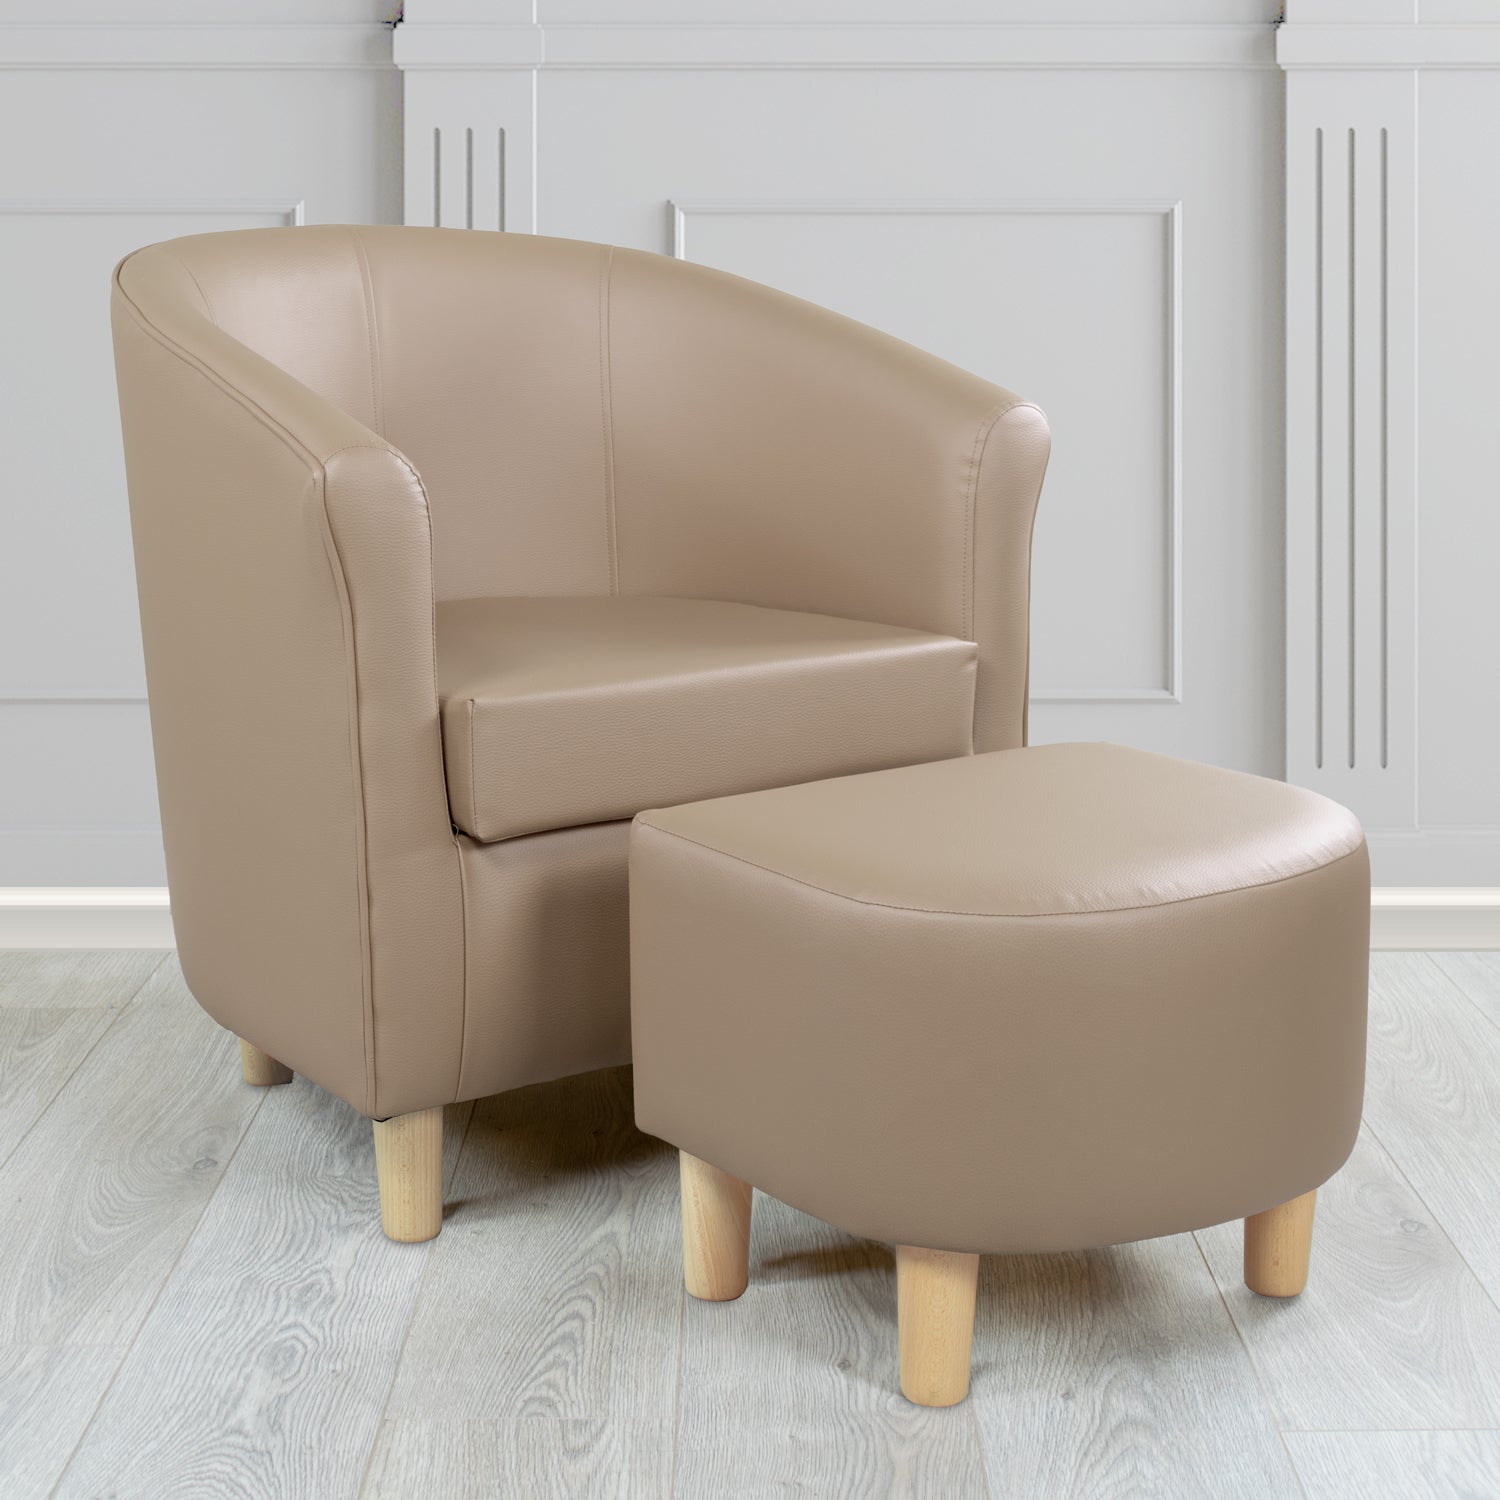 Tuscany Just Colour Magnum Faux Leather Tub Chair with Footstool Set - The Tub Chair Shop